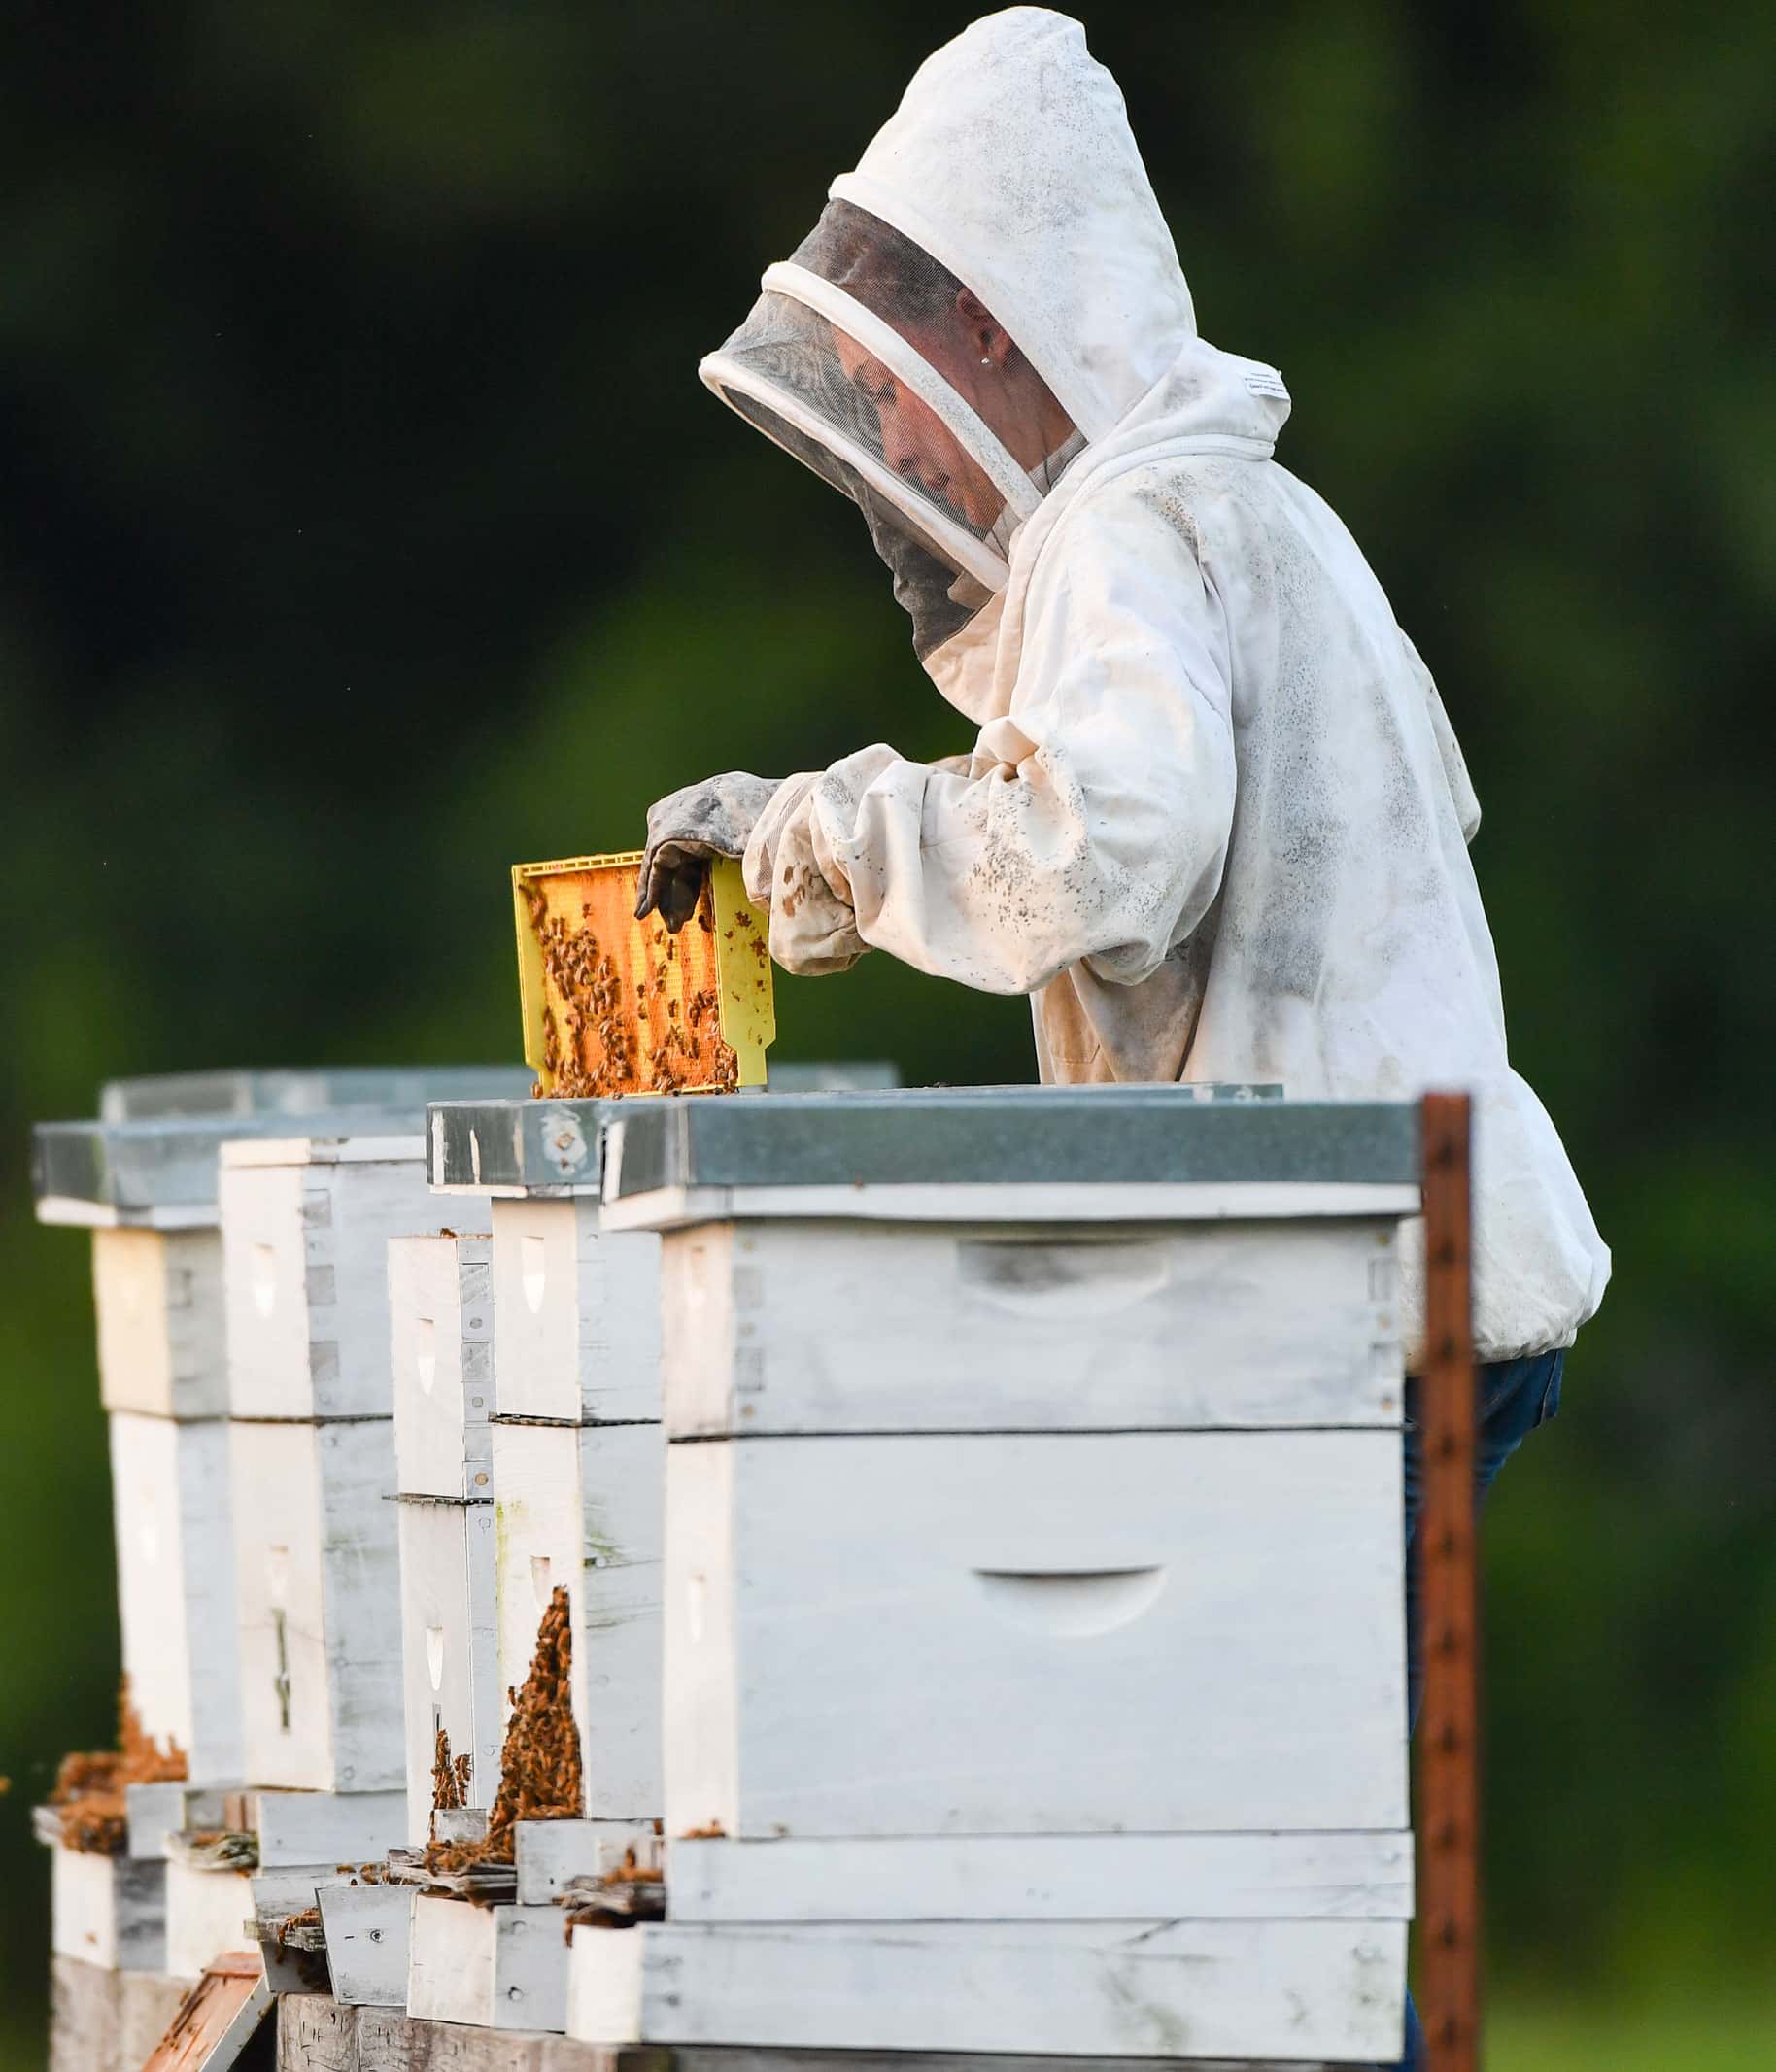 A student performs a hive check while suited up around the bees